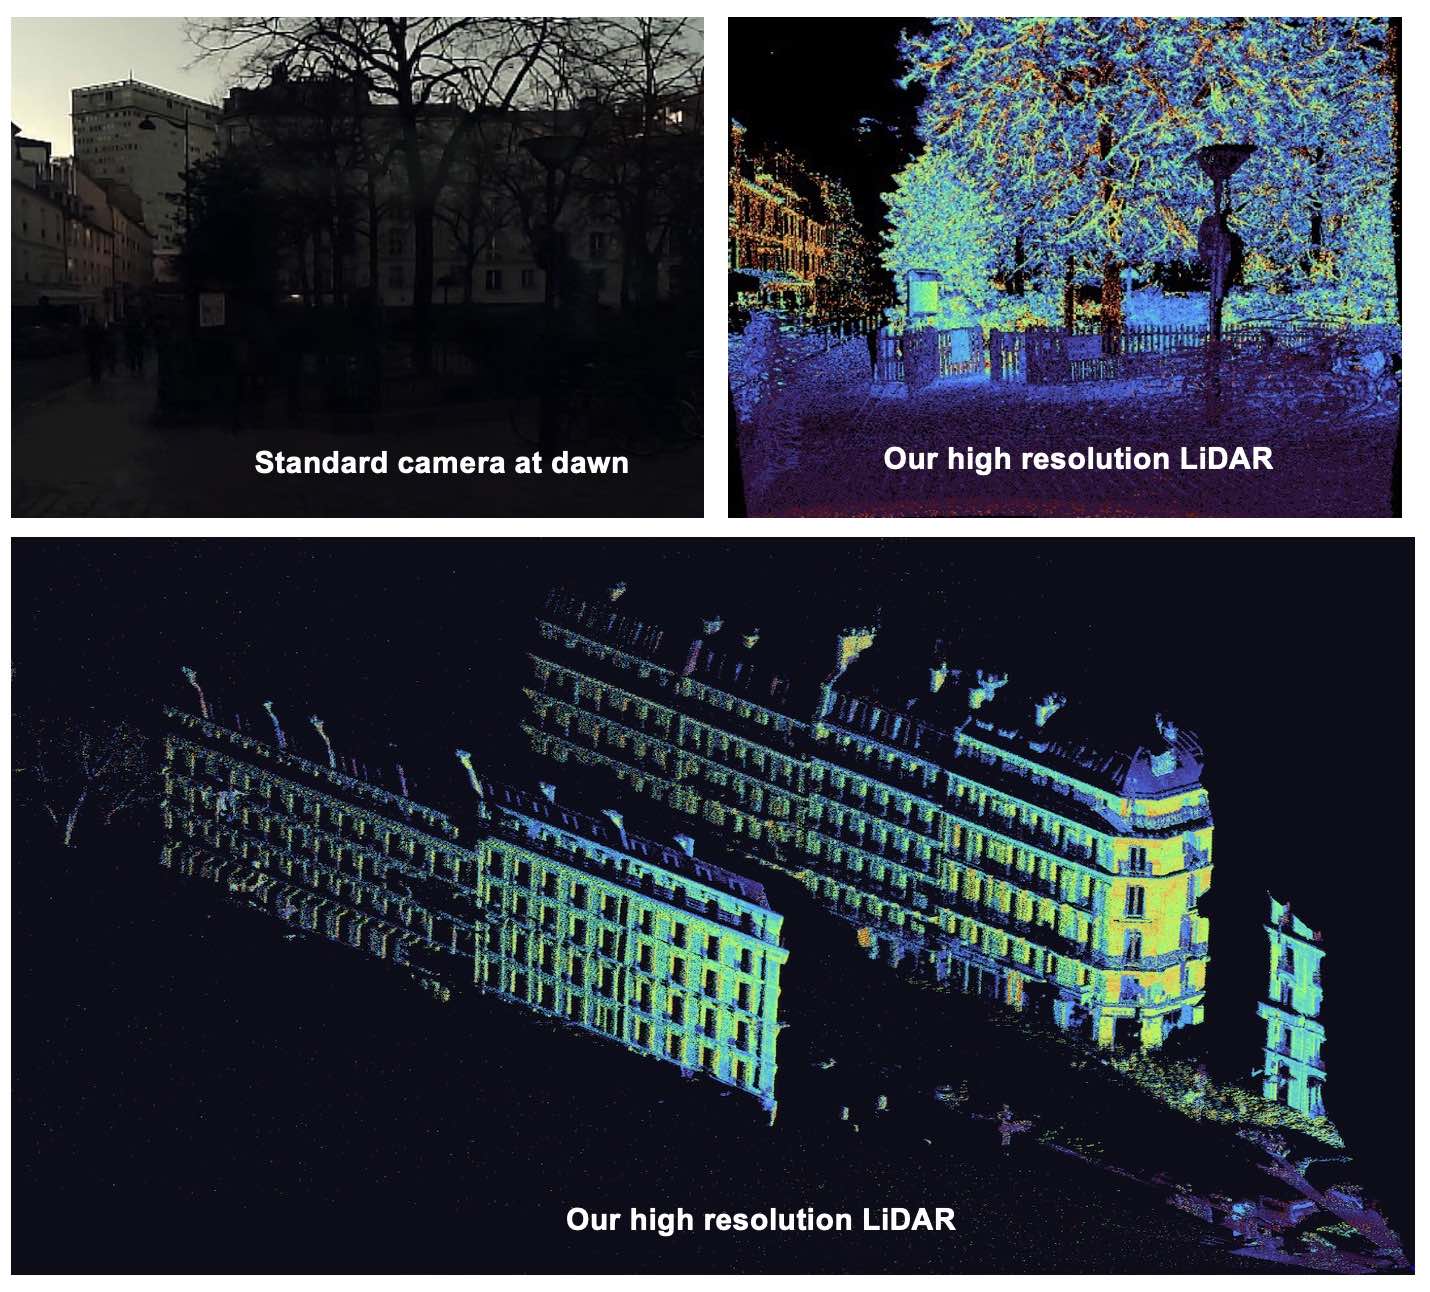 Paris street view with our SWIR Multispectral LiDAR at dawn compared with camera